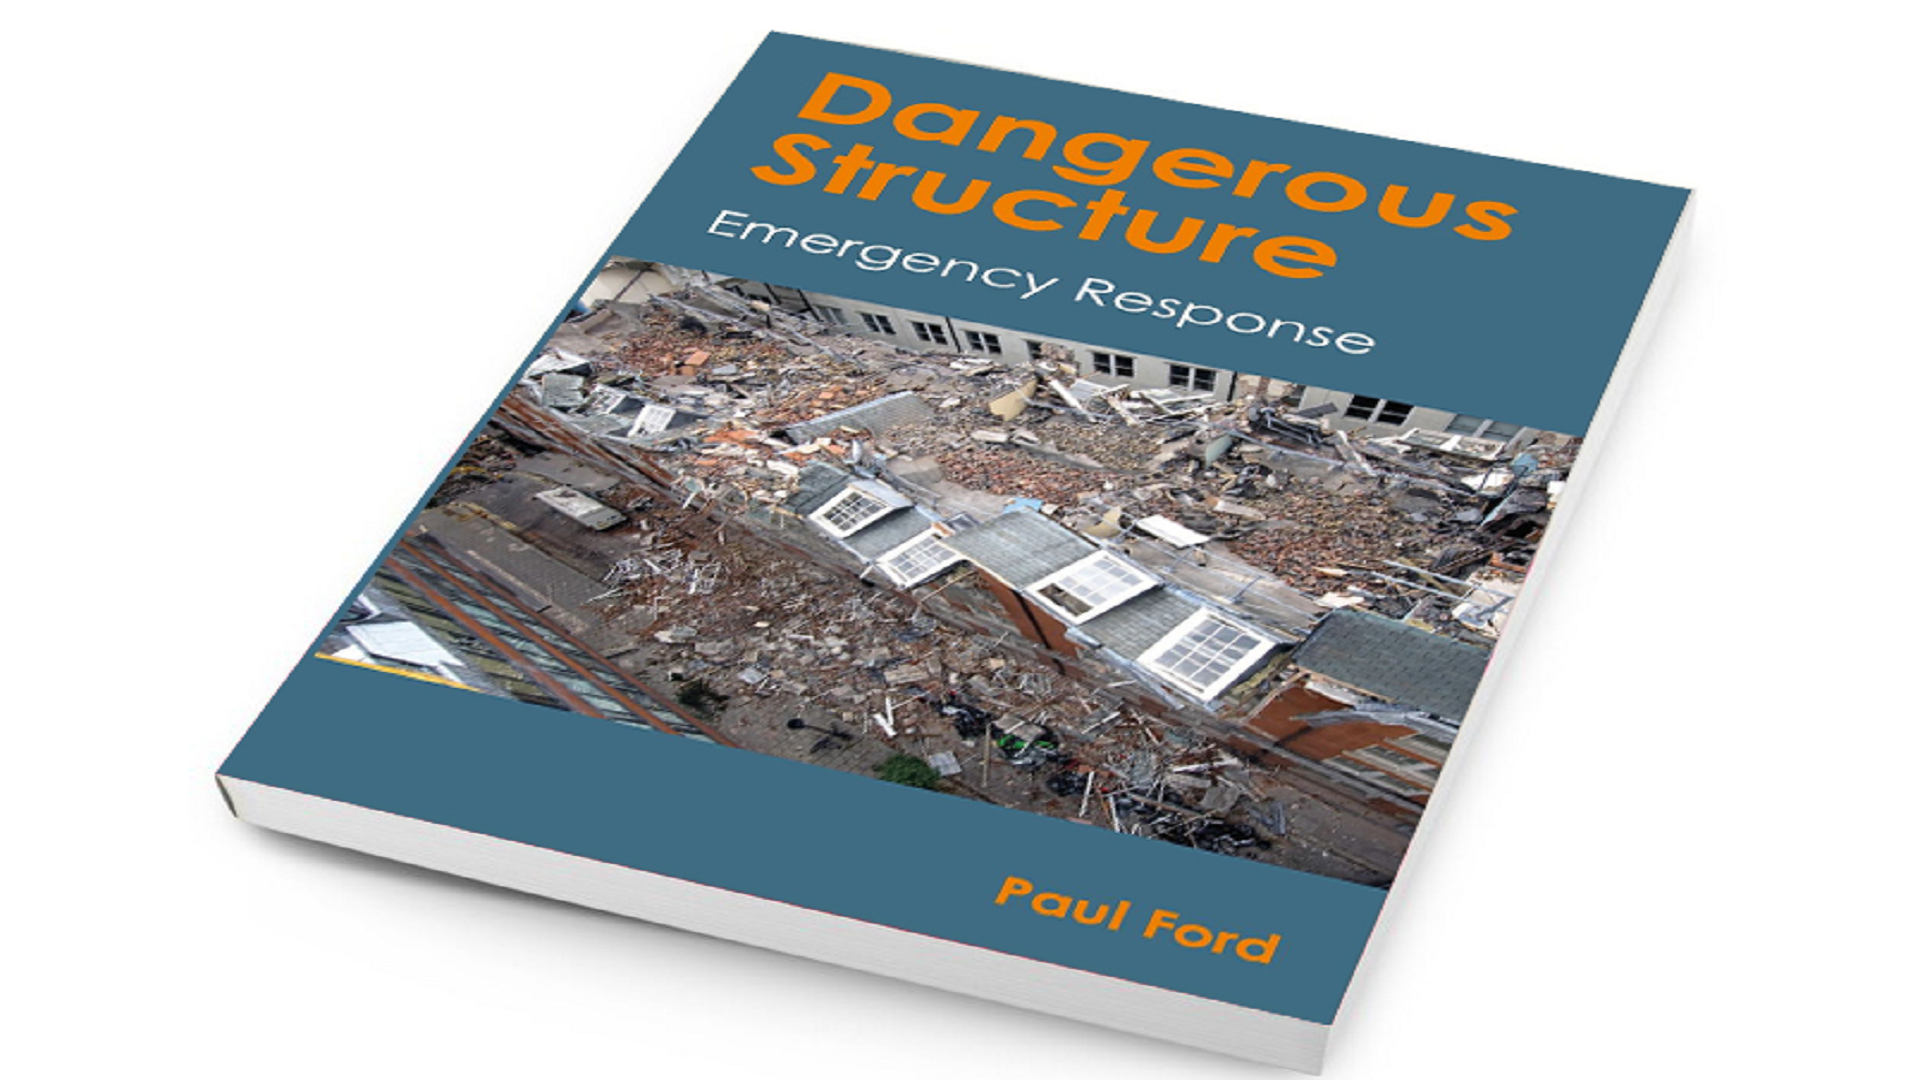 https://www.degroupuk.com/wp-content/uploads/2023/05/Dangerous-Structures-the-book_sticky.png